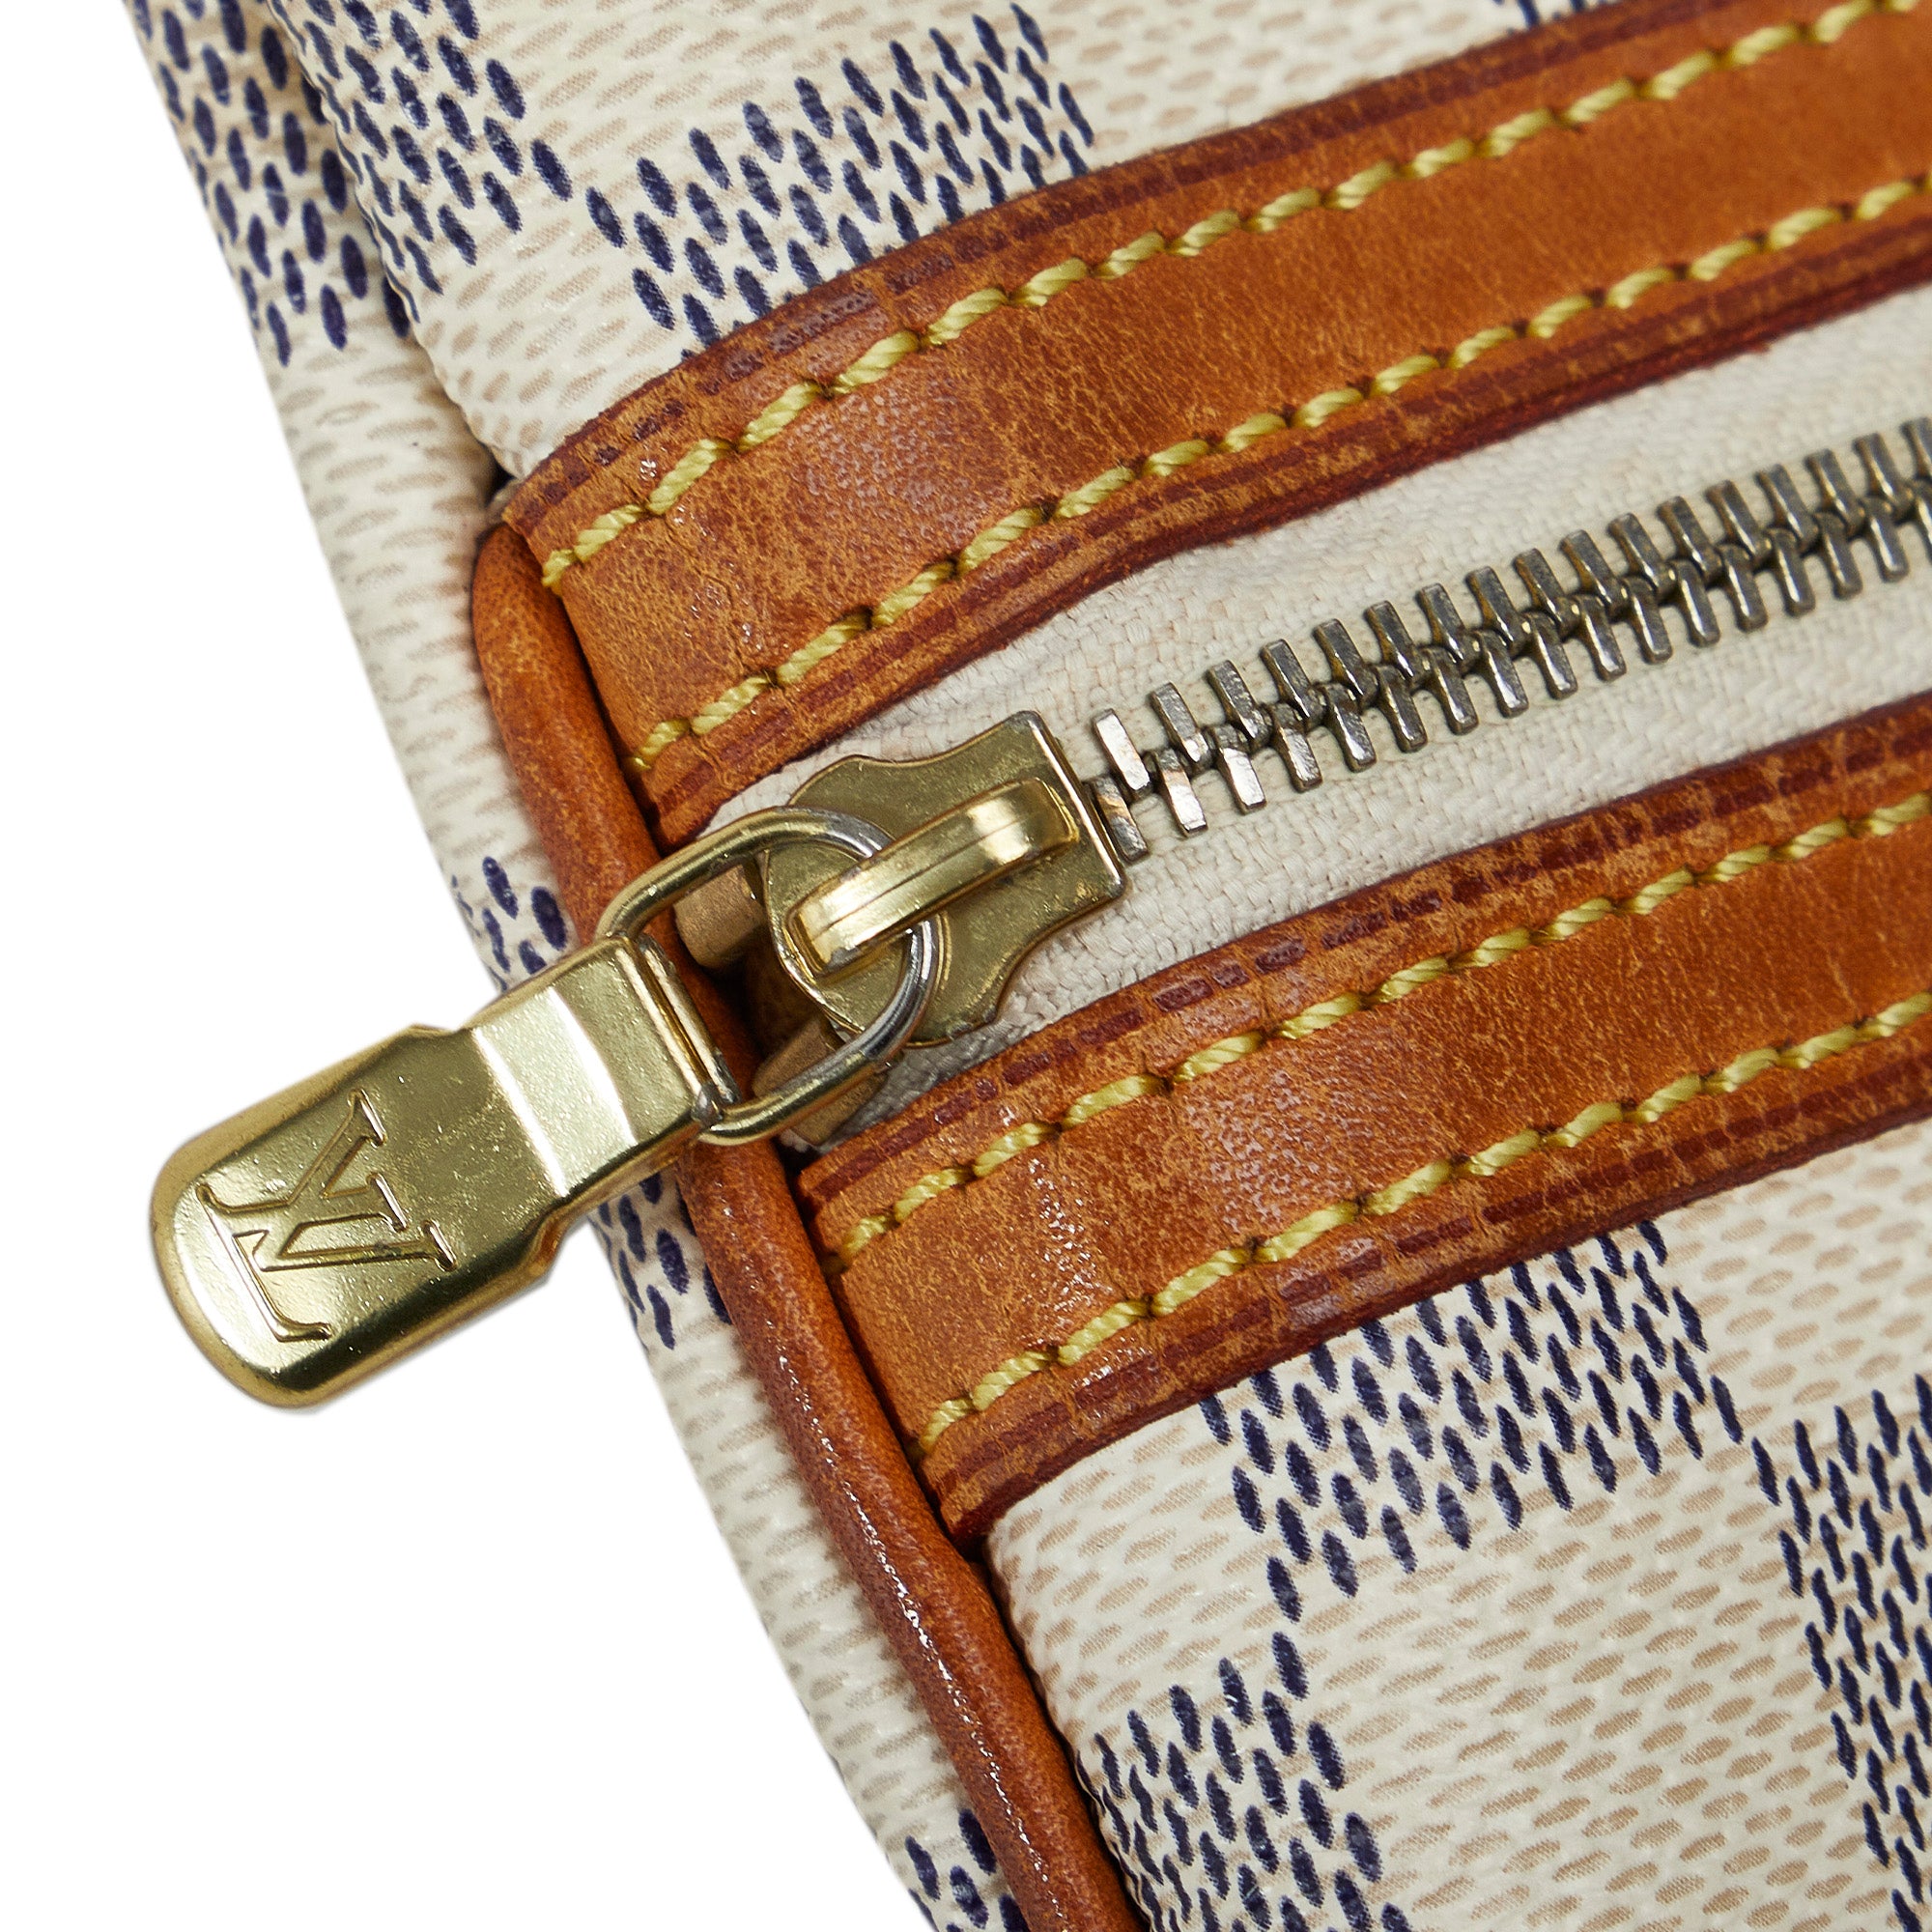 Louis Vuitton Pre-Owned White Damier Azur Pochette Bosphore Canvas Crossbody  Bag, Best Price and Reviews